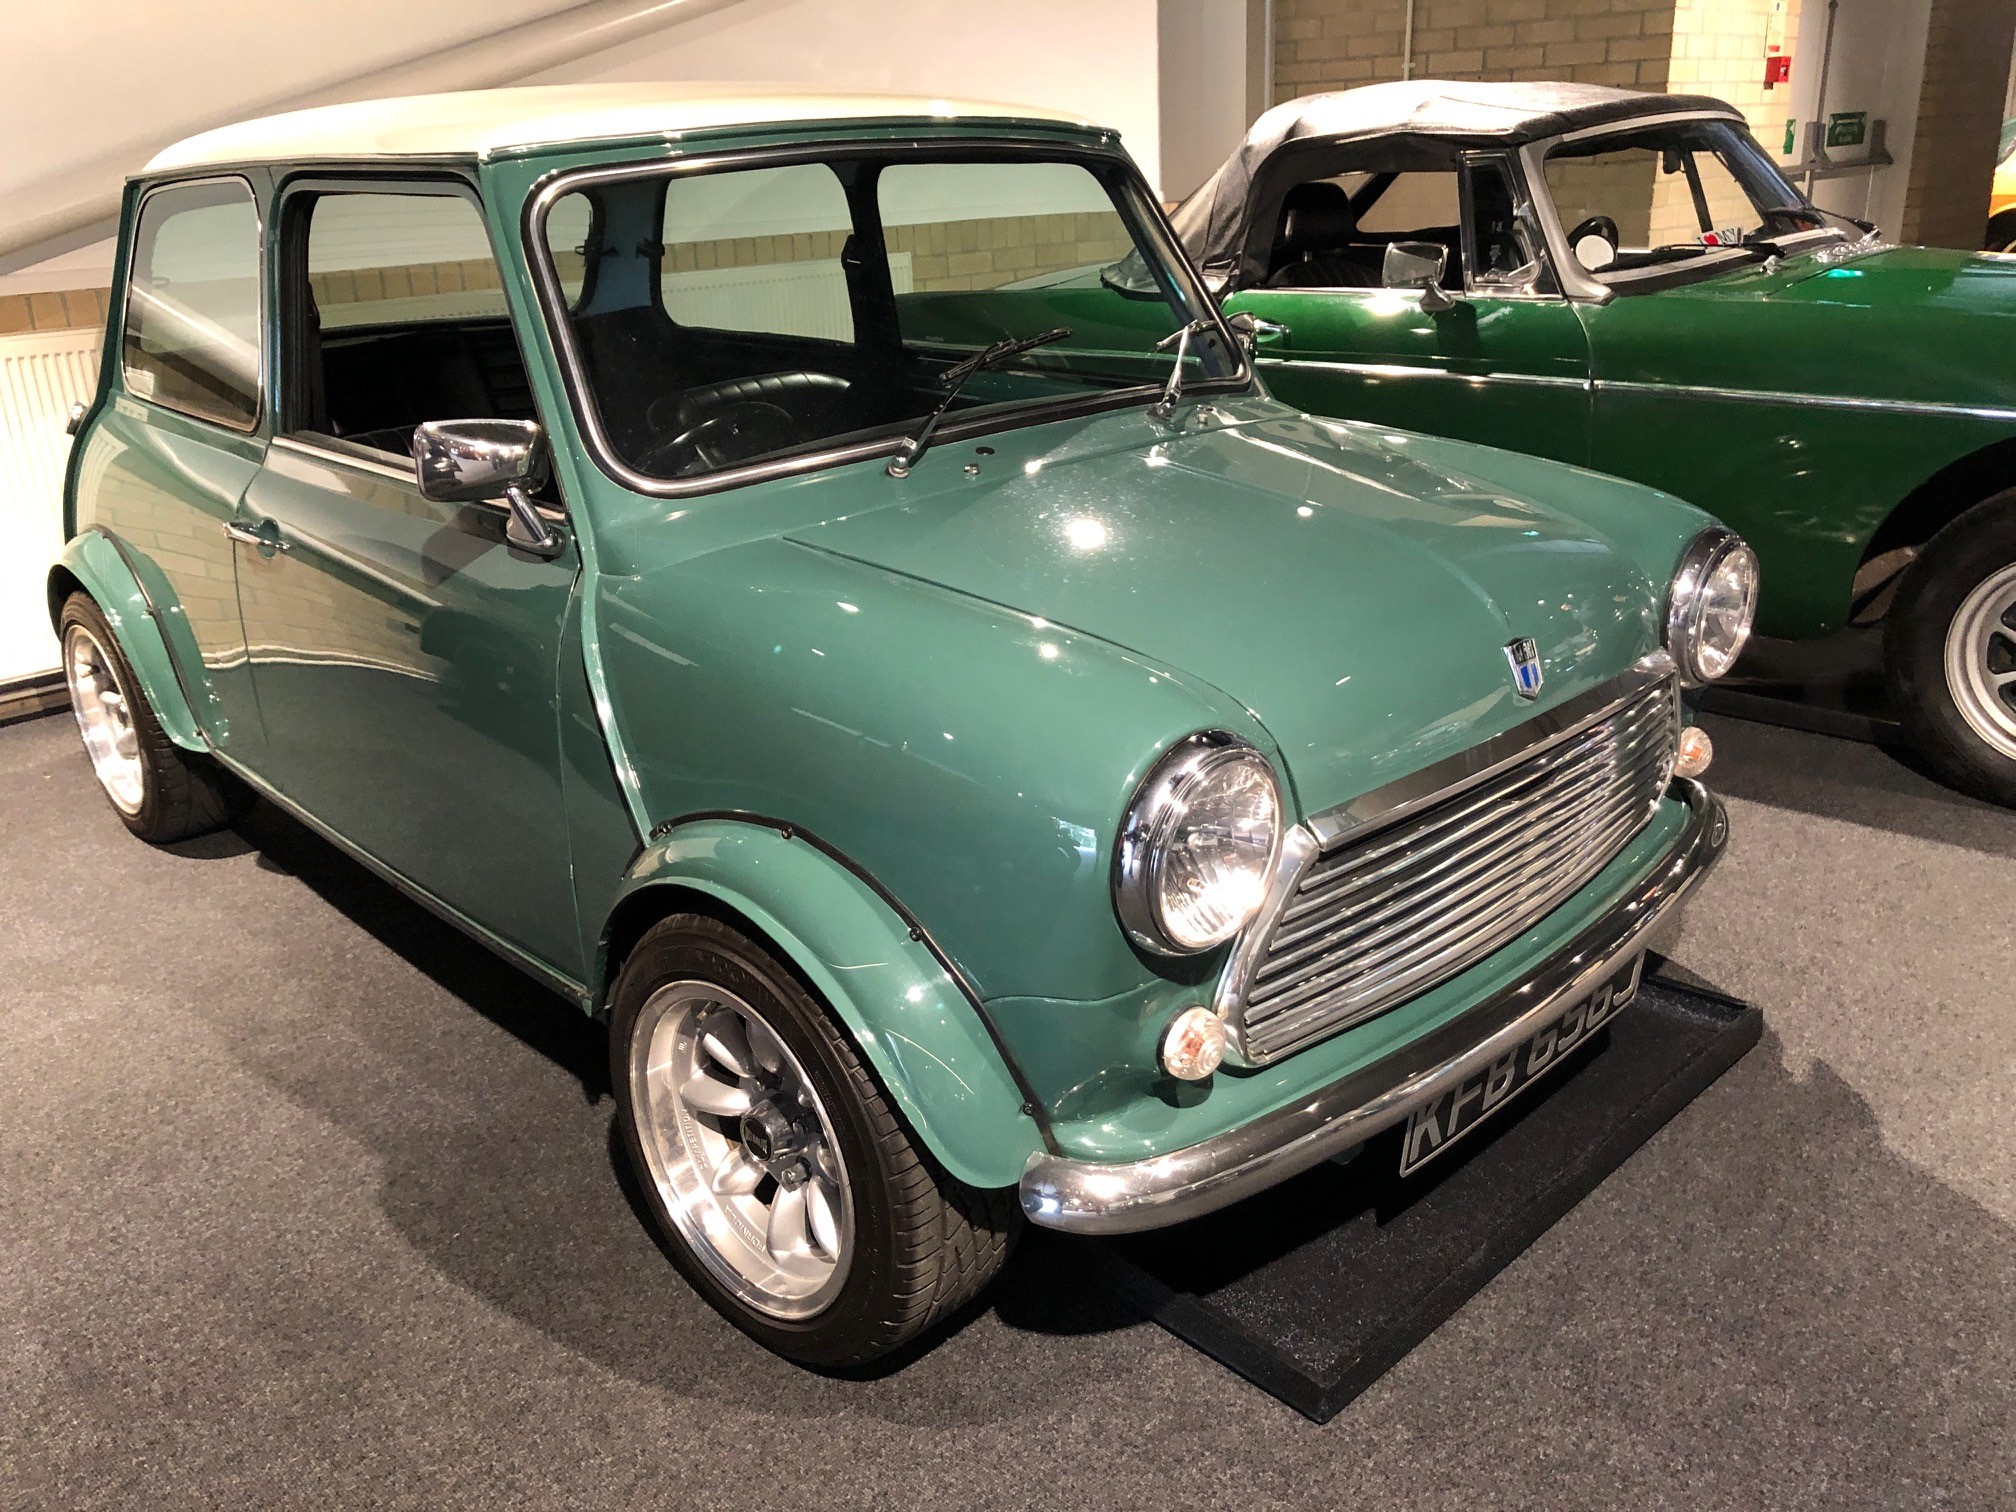 1971 Mini Cooper S Recreation Registration number KFB 656J Green with a white roof Black interior - Image 19 of 23